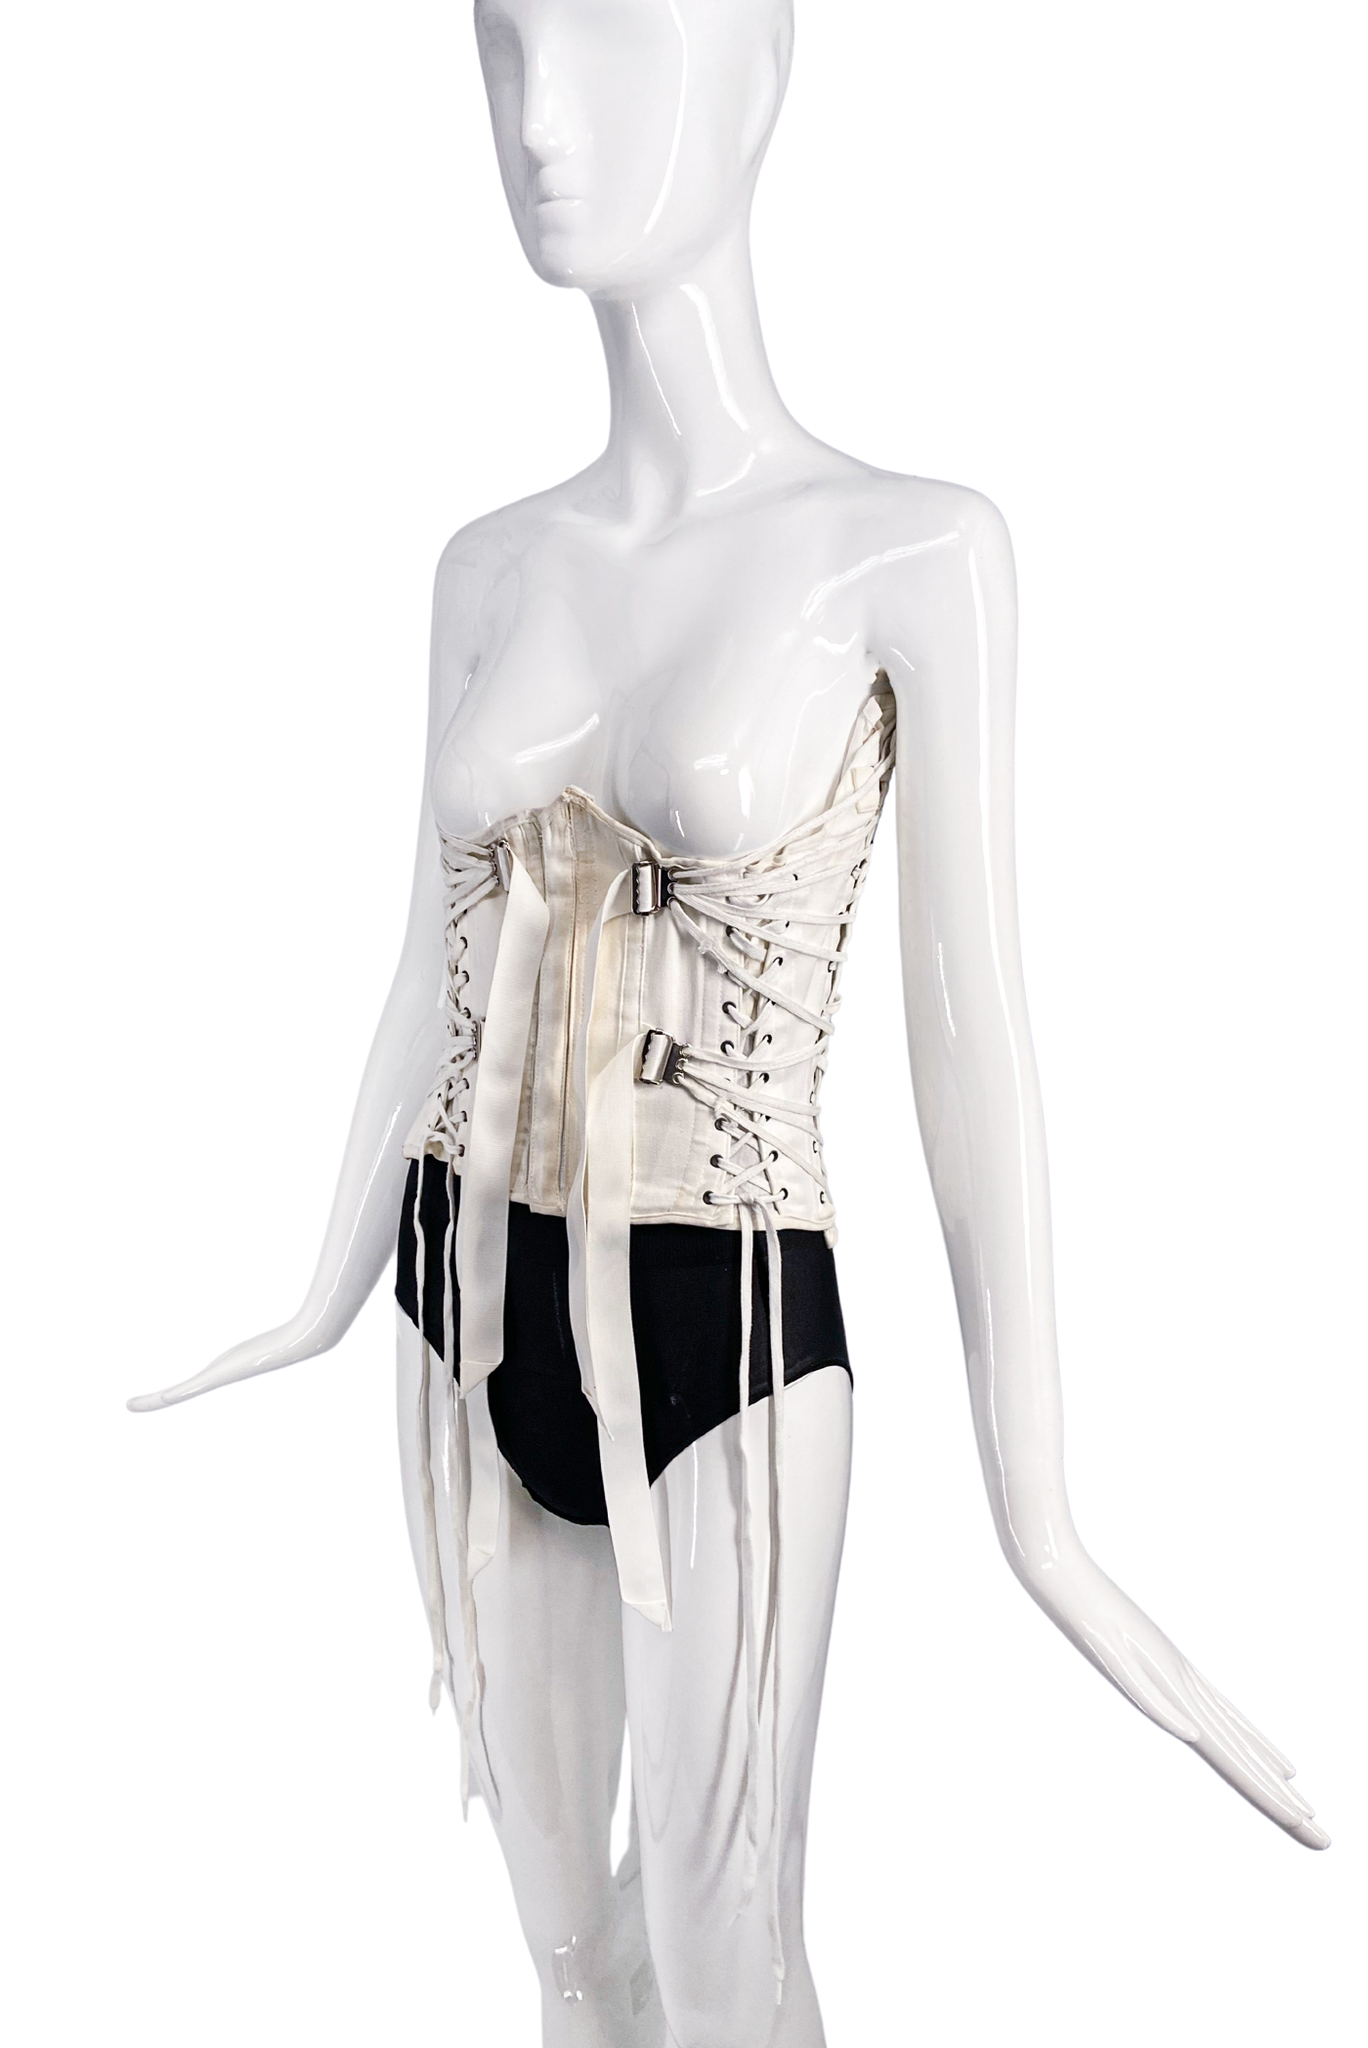 3,614 Corset Medical Royalty-Free Photos and Stock Images